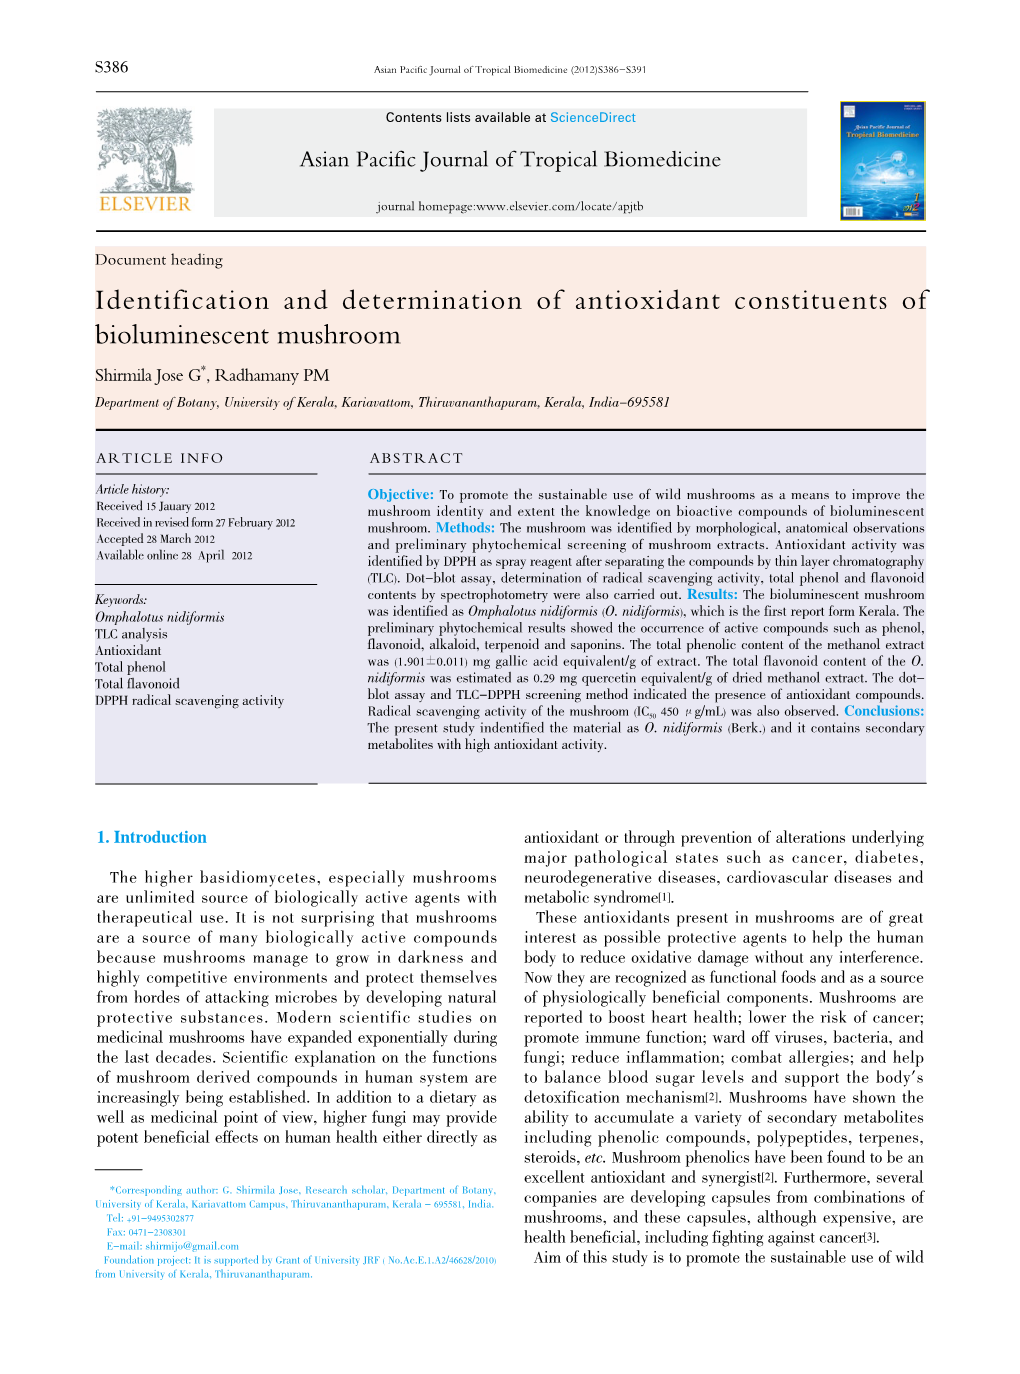 Identification and Determination of Antioxidant Constituents Of